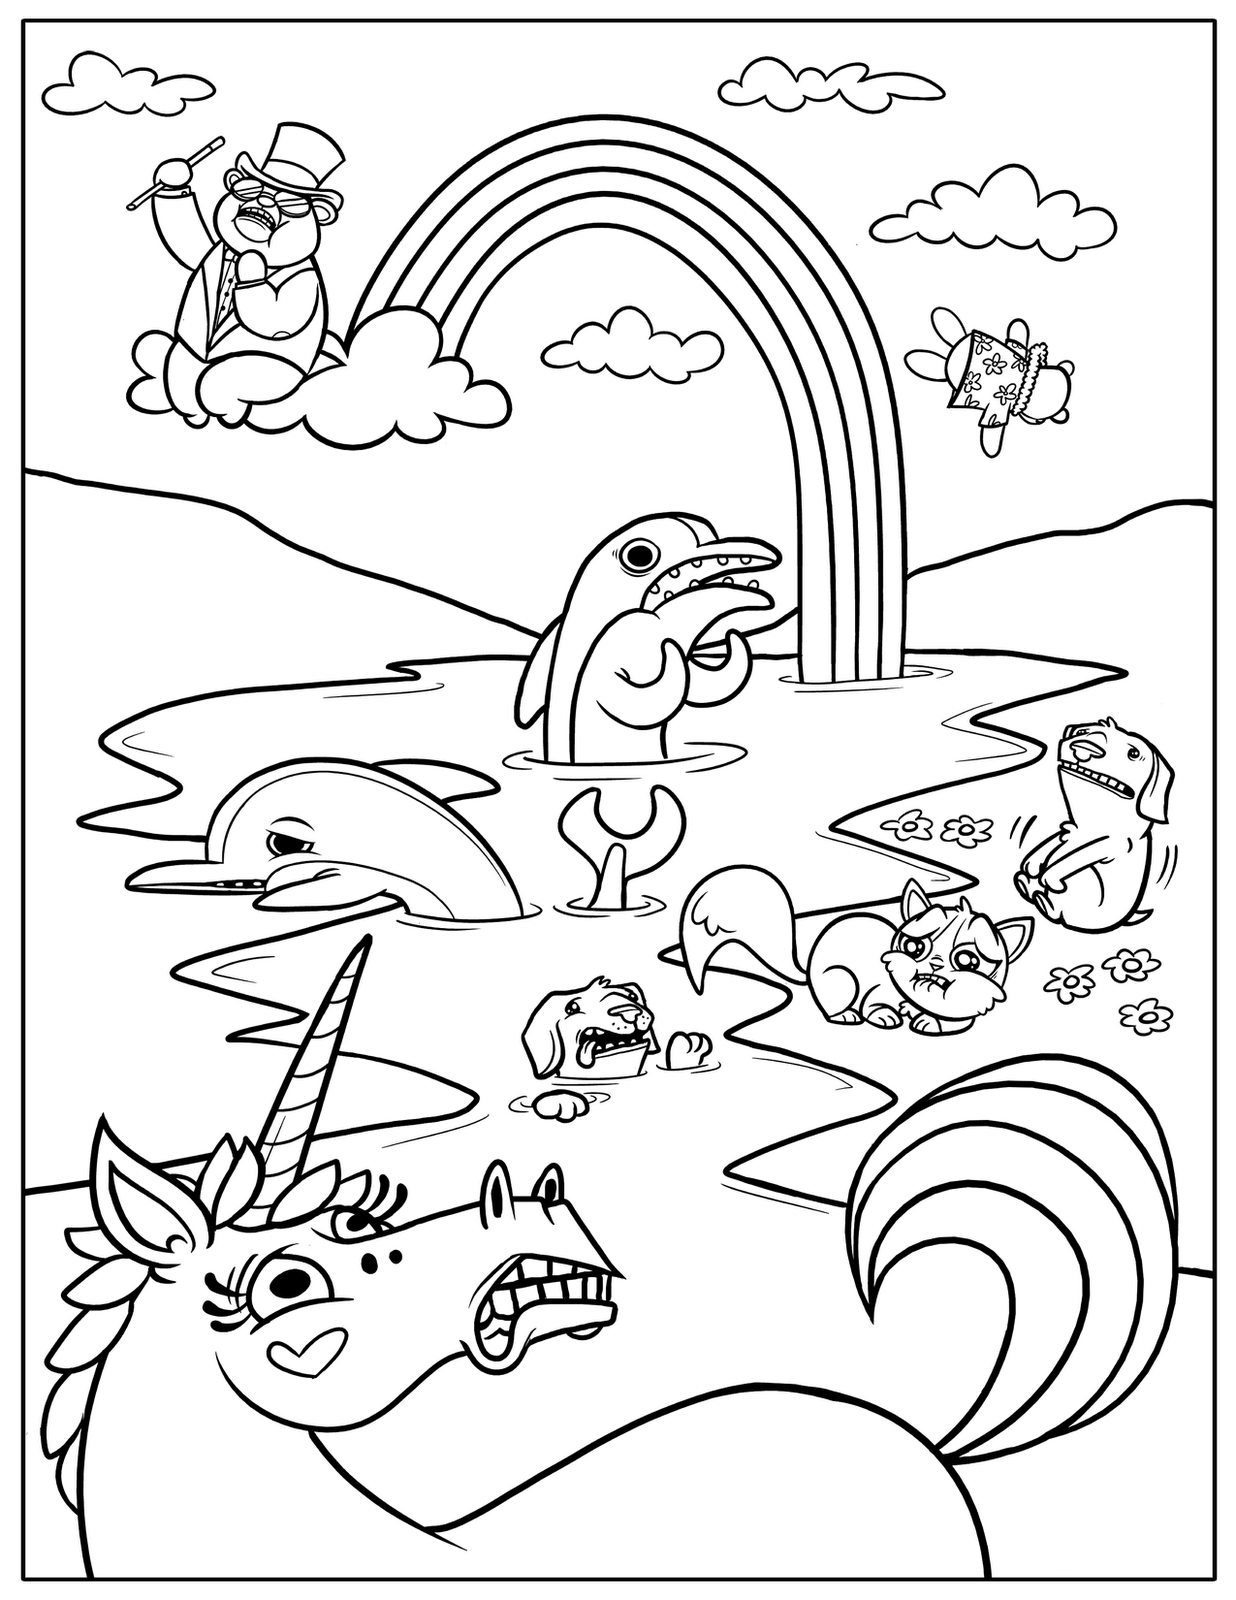 25 New Free Printable Coloring Pages For Kids